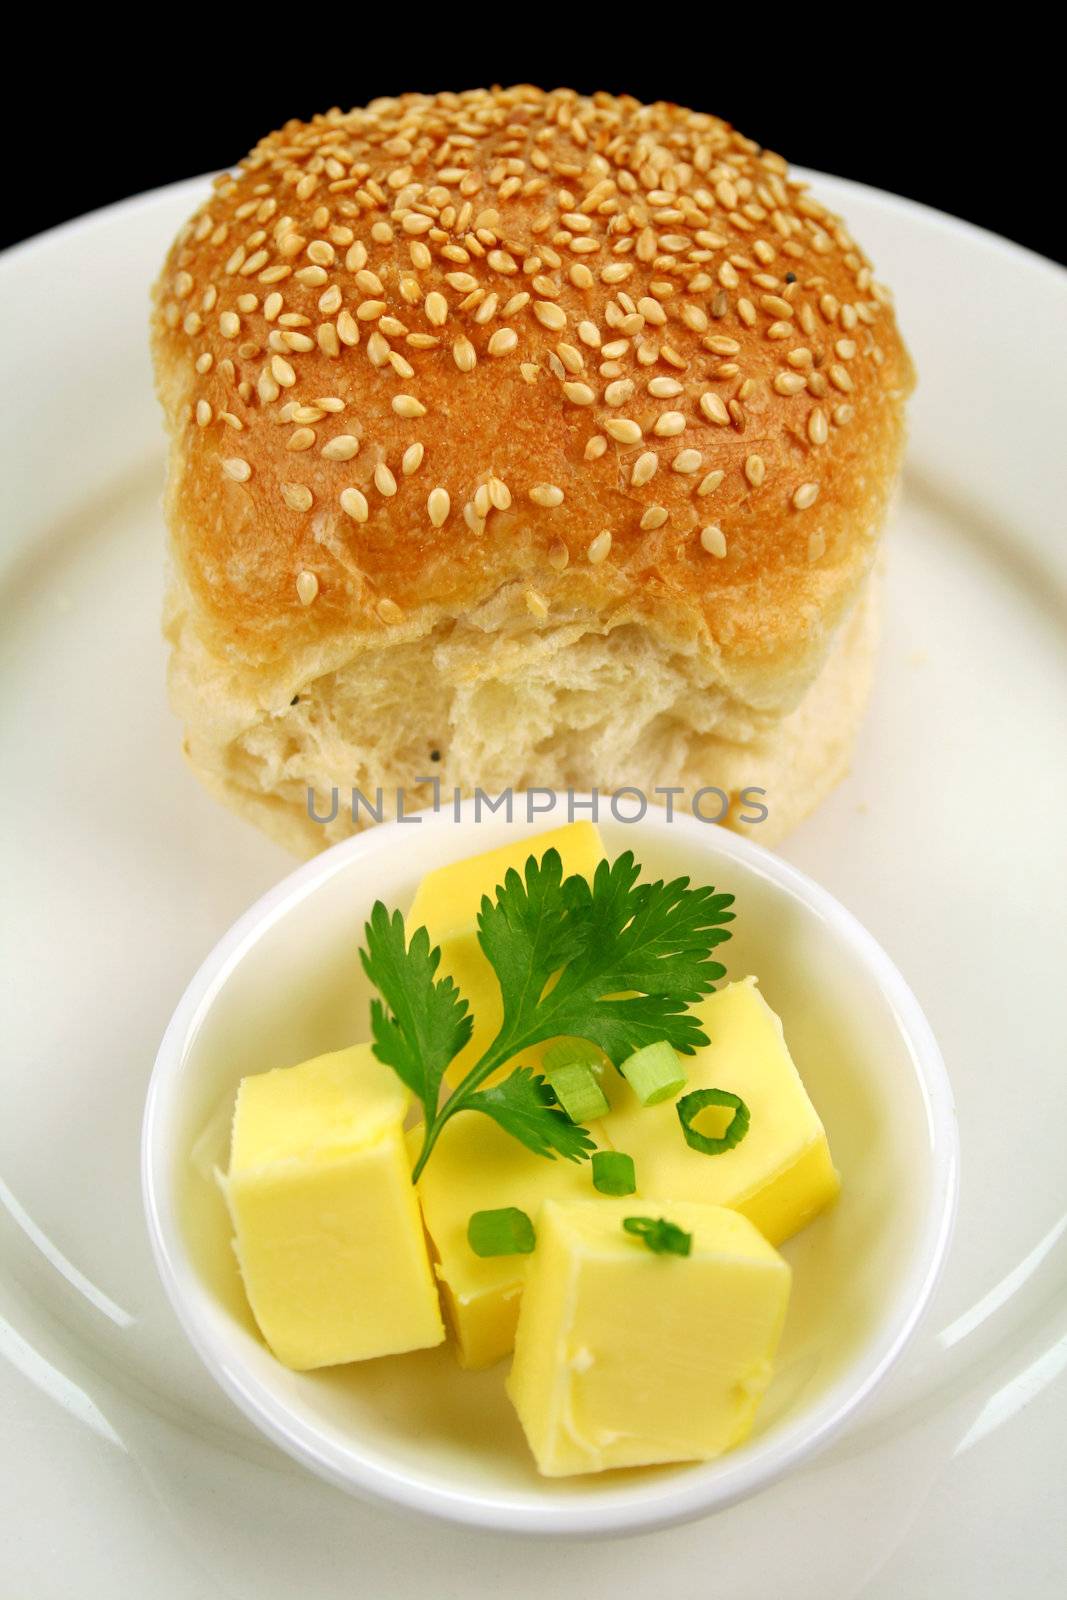 Dinner bread roll with dish of butter with green garnish.